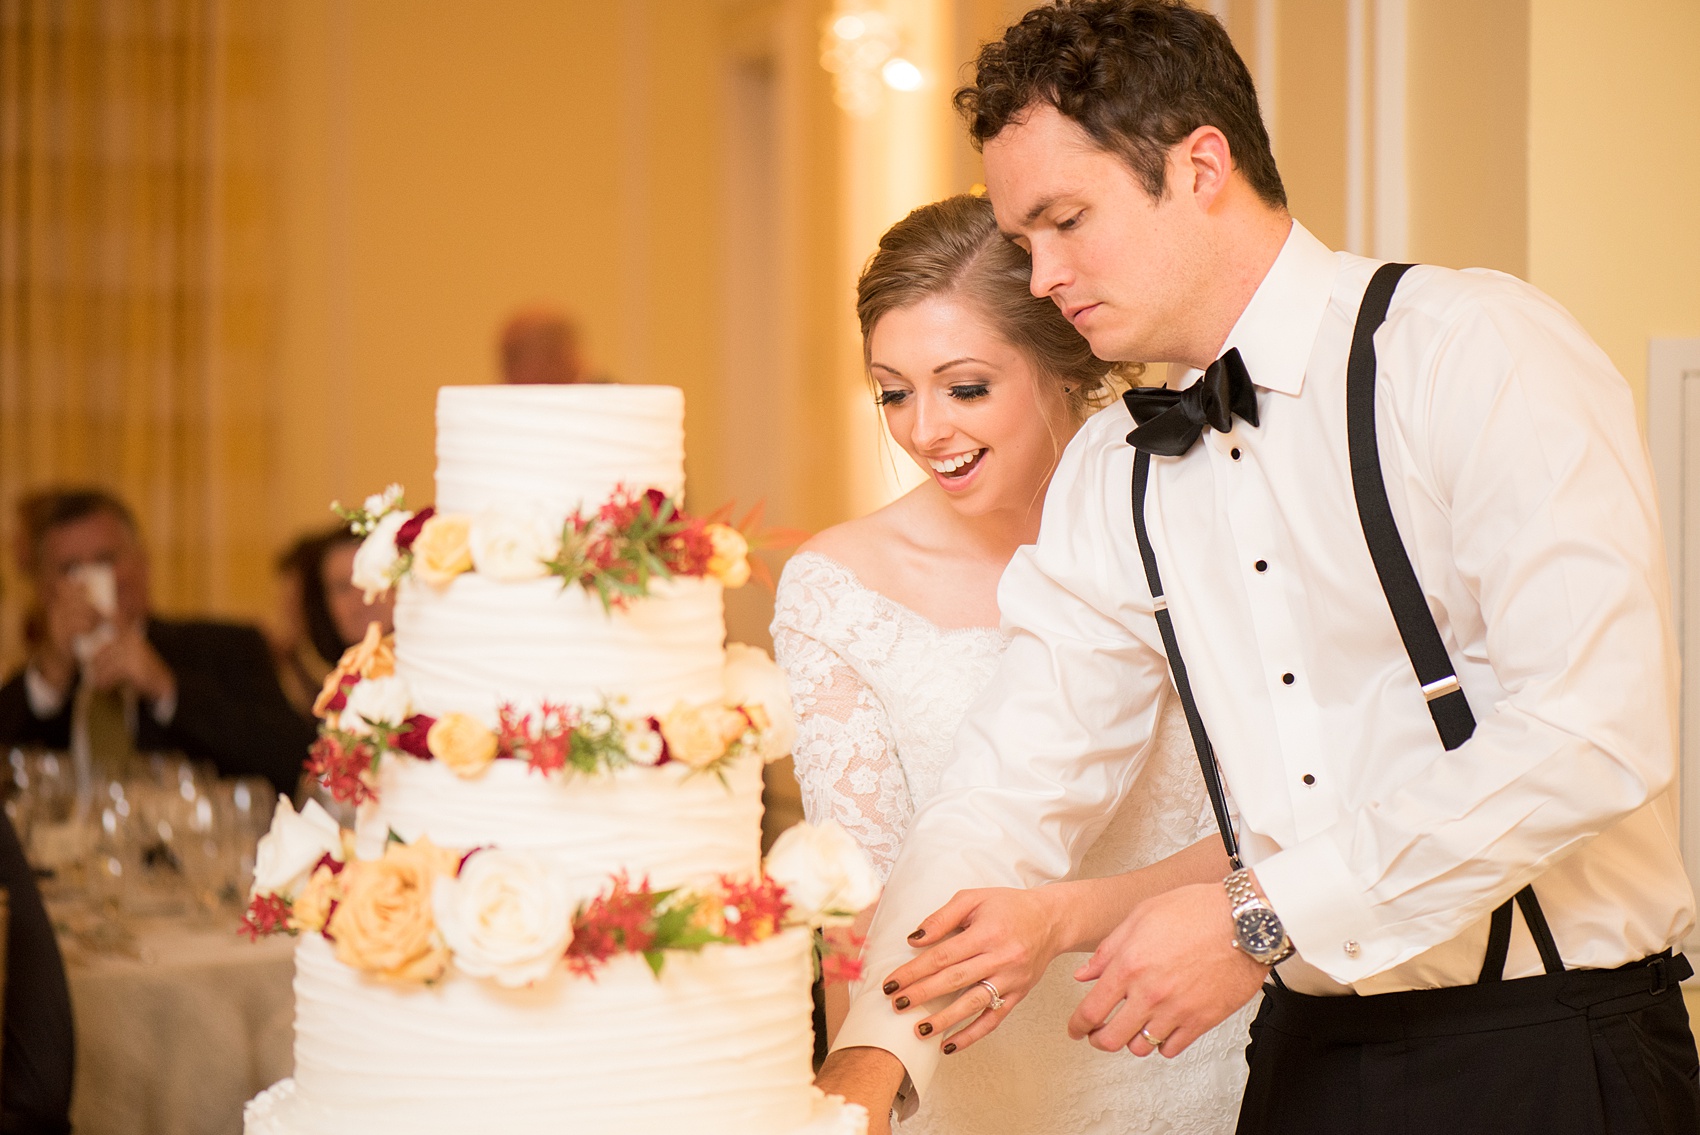 Beautiful wedding photos at The Carolina Inn at Chapel Hill, North Carolina by Mikkel Paige Photography. Picture of the bride and groom's cake cutting. Cake by Ashley Cakes NC and planning by McLean Events. Click through to see the rest of this gorgeous winter wedding! #thecarolinainn #snowywedding